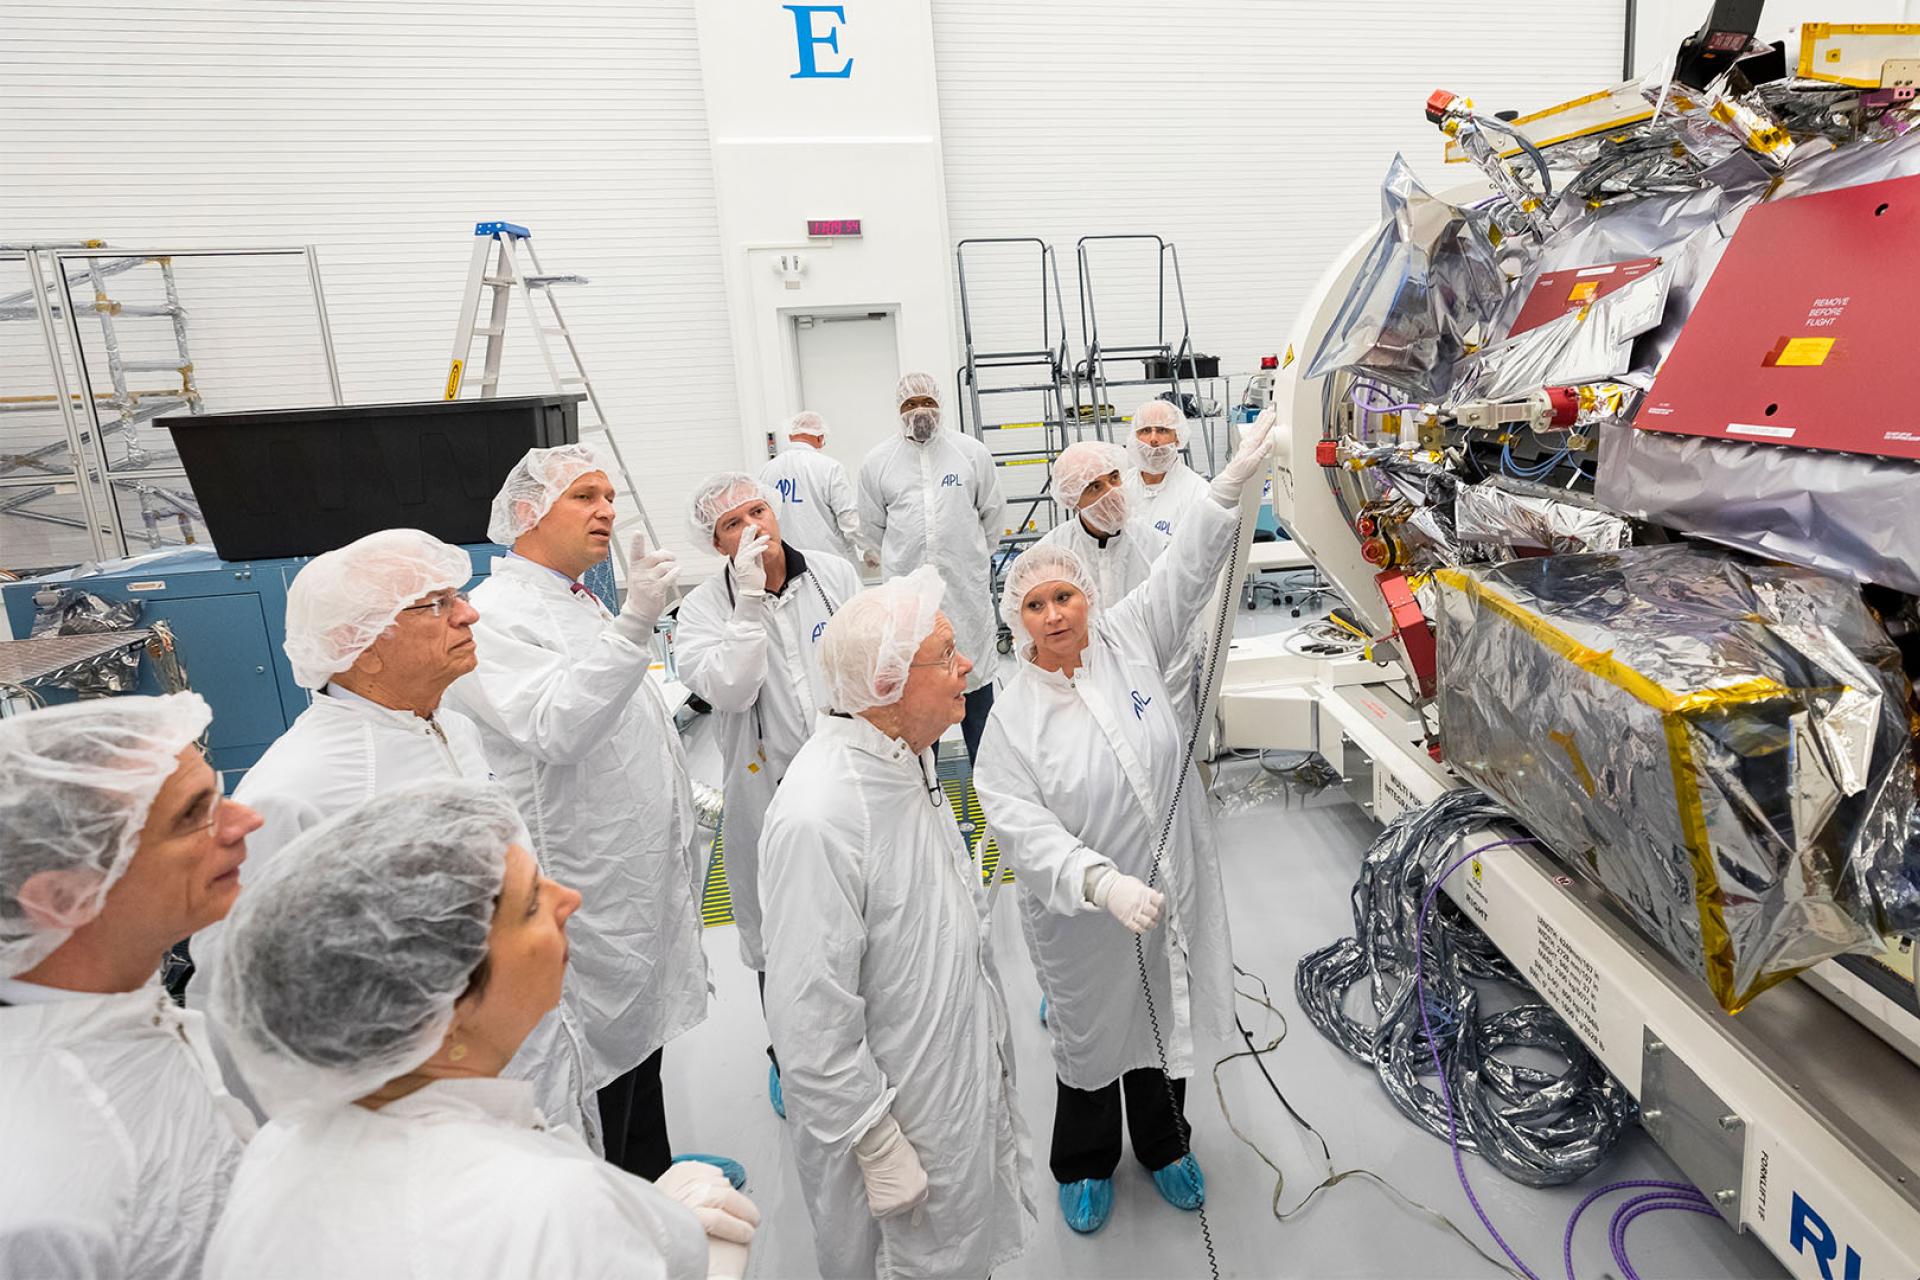 Eugene Parker, professor emeritus at the University of Chicago, visits the spacecraft that bears his name, in October 2017. Engineers in the clean room at APL, which built and now operates Parker Solar Probe, point out the instruments that are now collecting data from inside the Sun’s atmosphere.